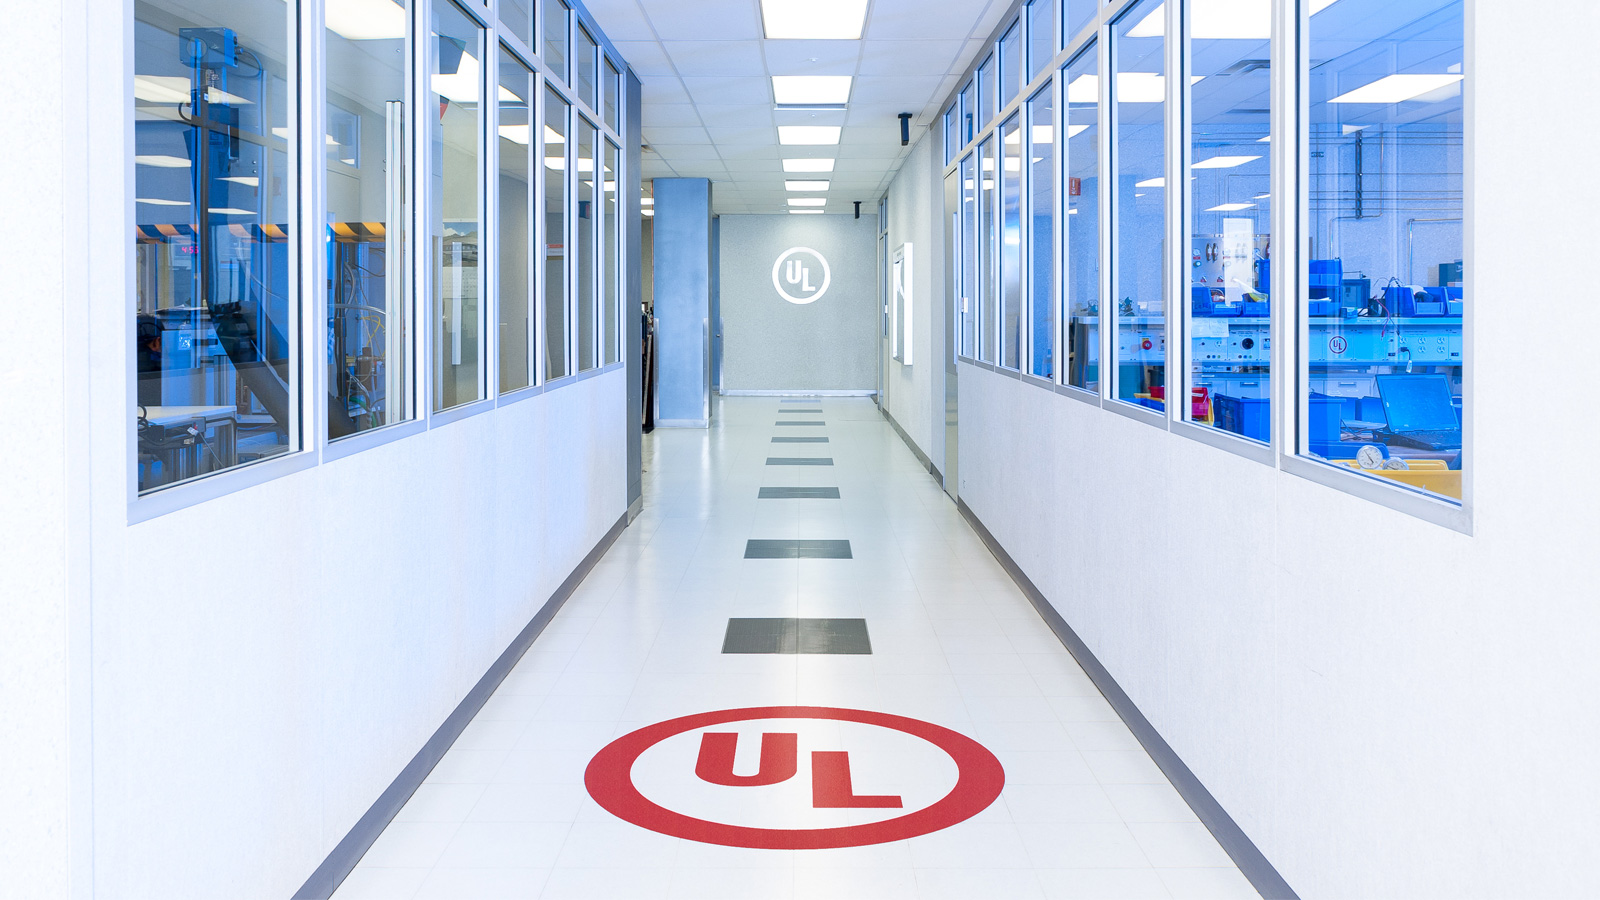 Underwriters Laboratories (UL) certification giant- offices